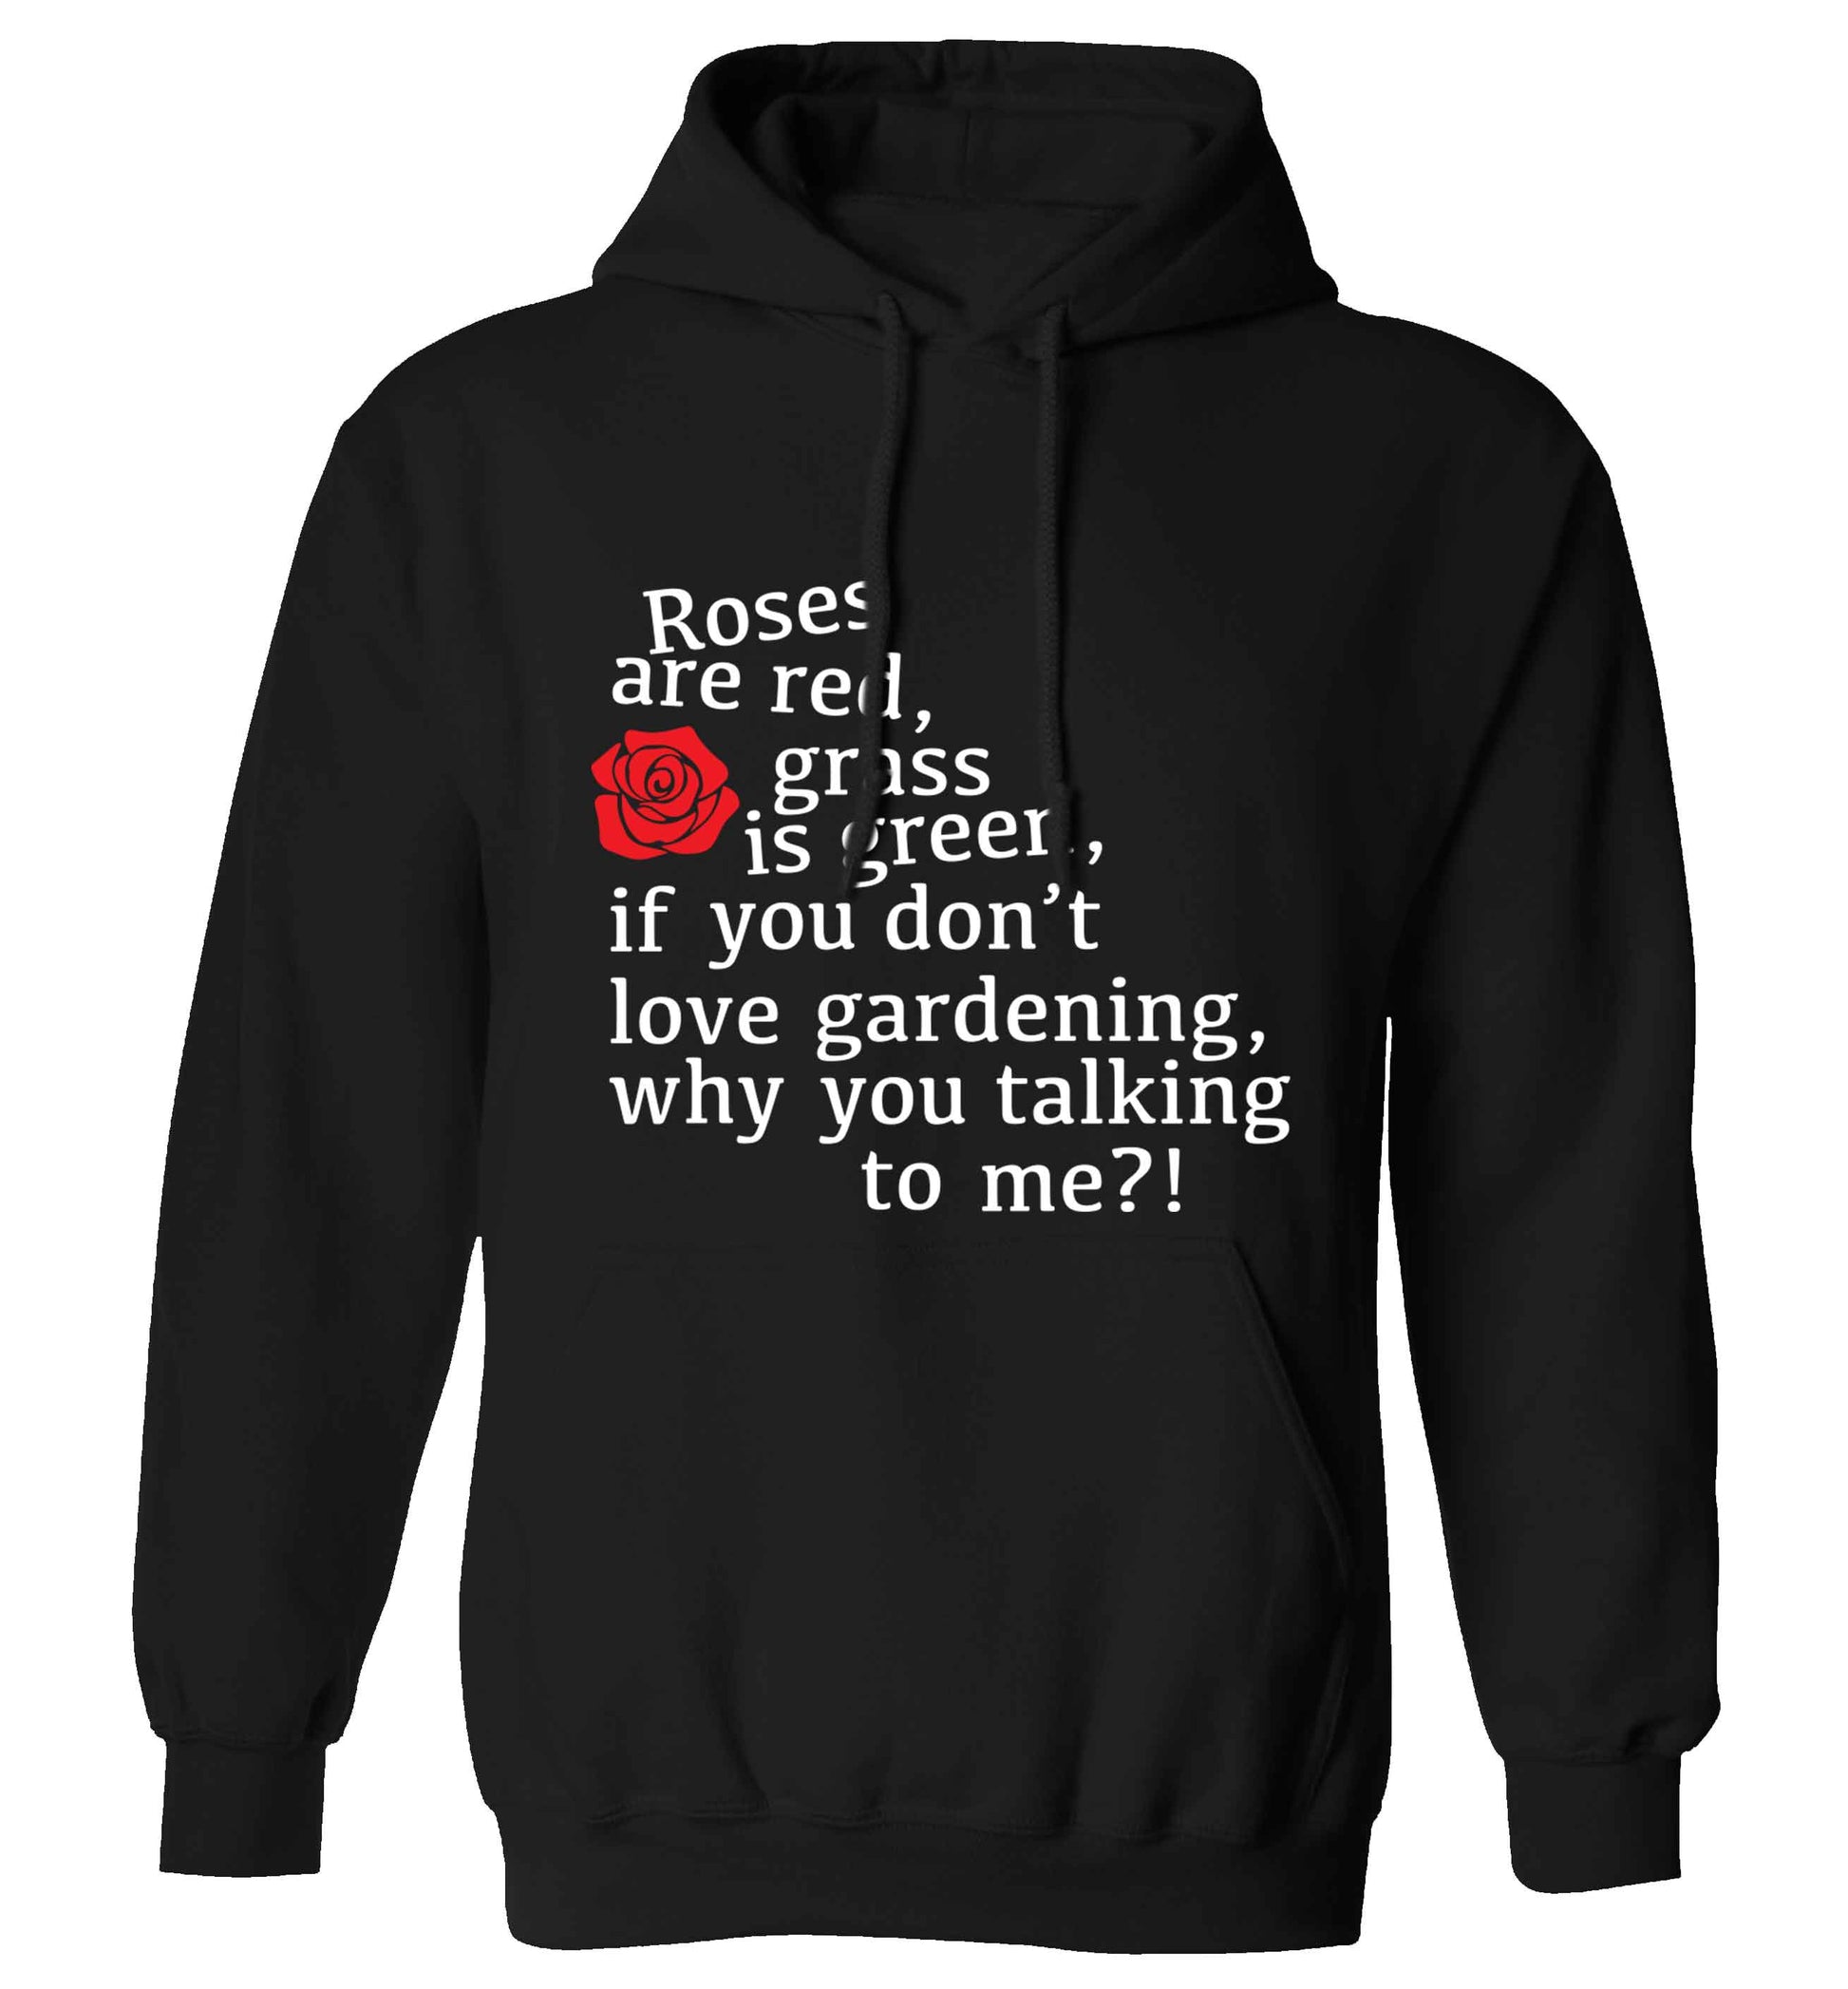 Roses are red, grass is green, if you don't love gardening, why you talking to me adults unisex black hoodie 2XL